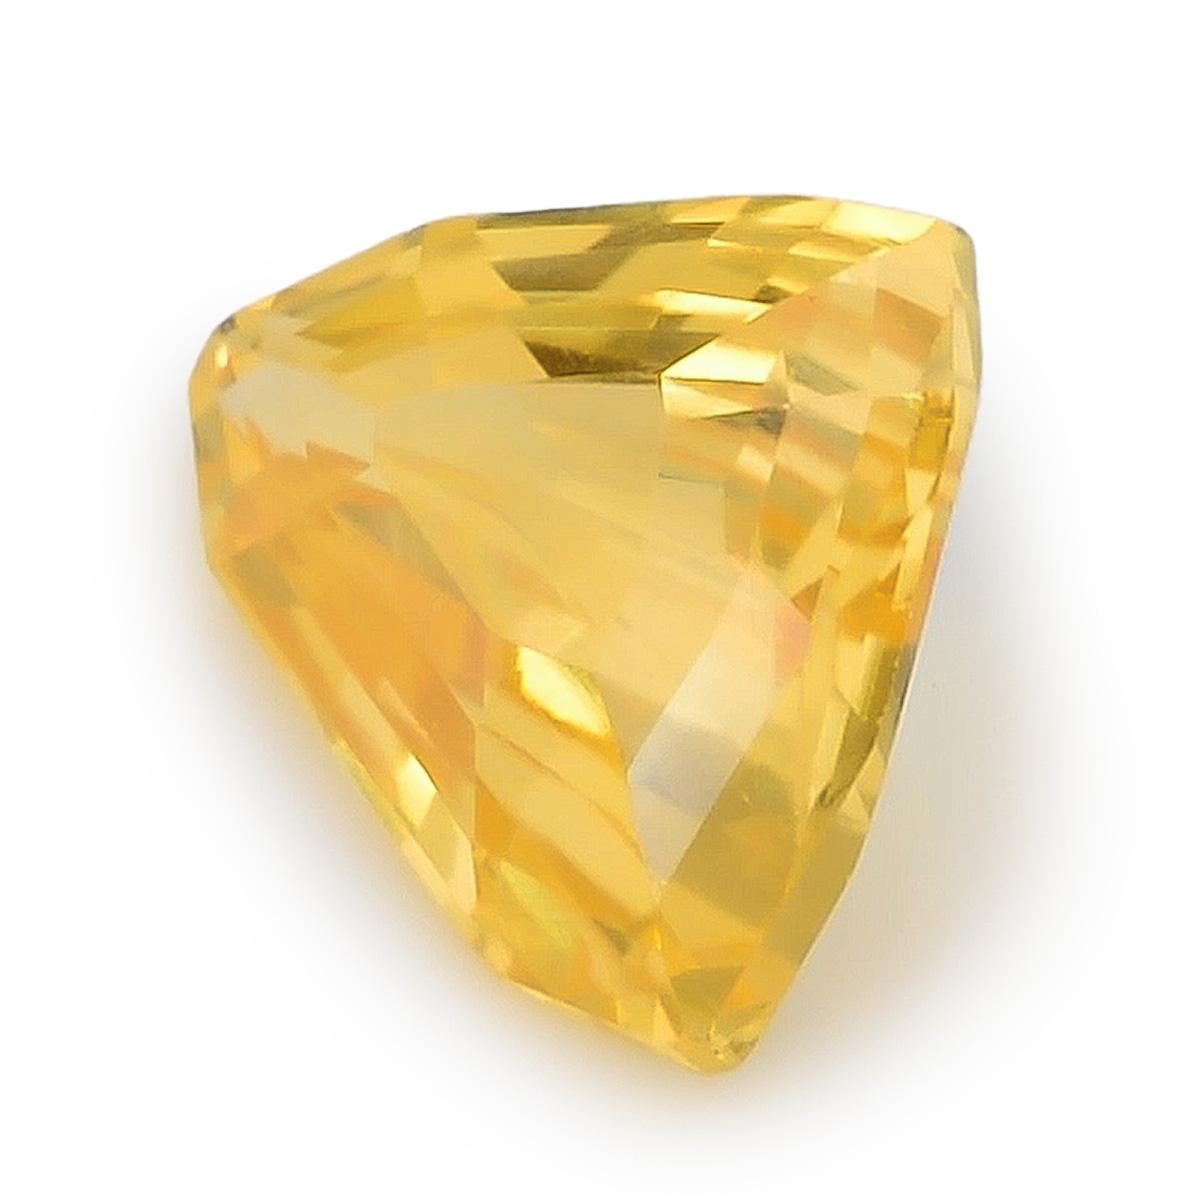 Dive into the captivating world of 1.67 carats Natural Yellow Sapphire from Sri Lanka. This gem's unique triangular shape measures 7.09 x 8.57 x 3.91 mm, showcasing its radiant yellow hue that symbolizes positivity and energy. With its very clean